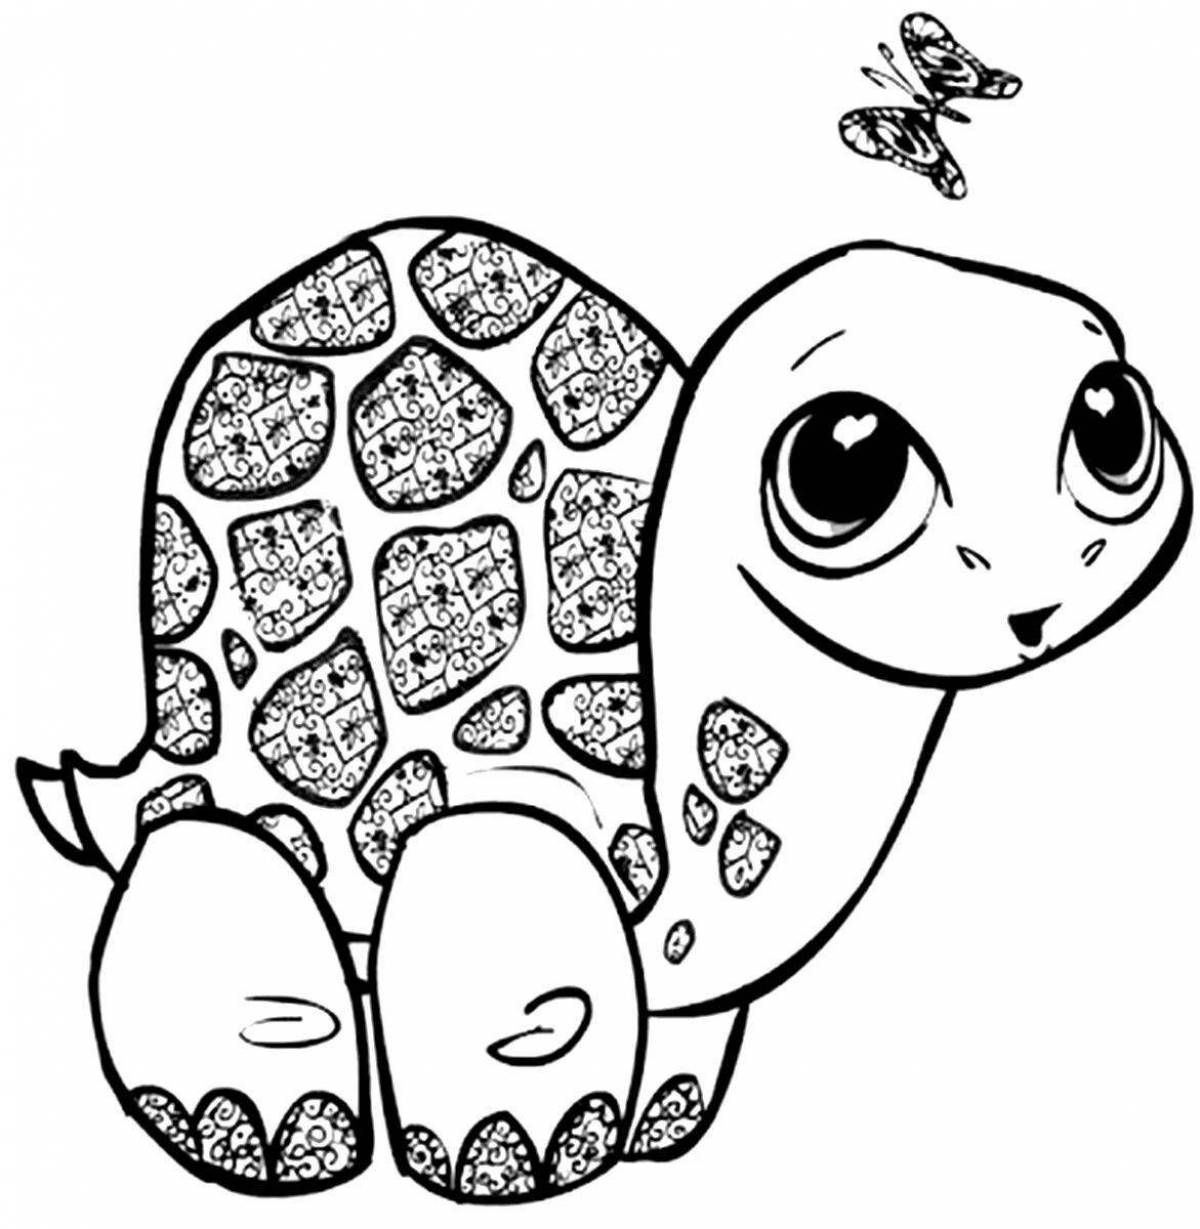 Live cute turtle coloring book